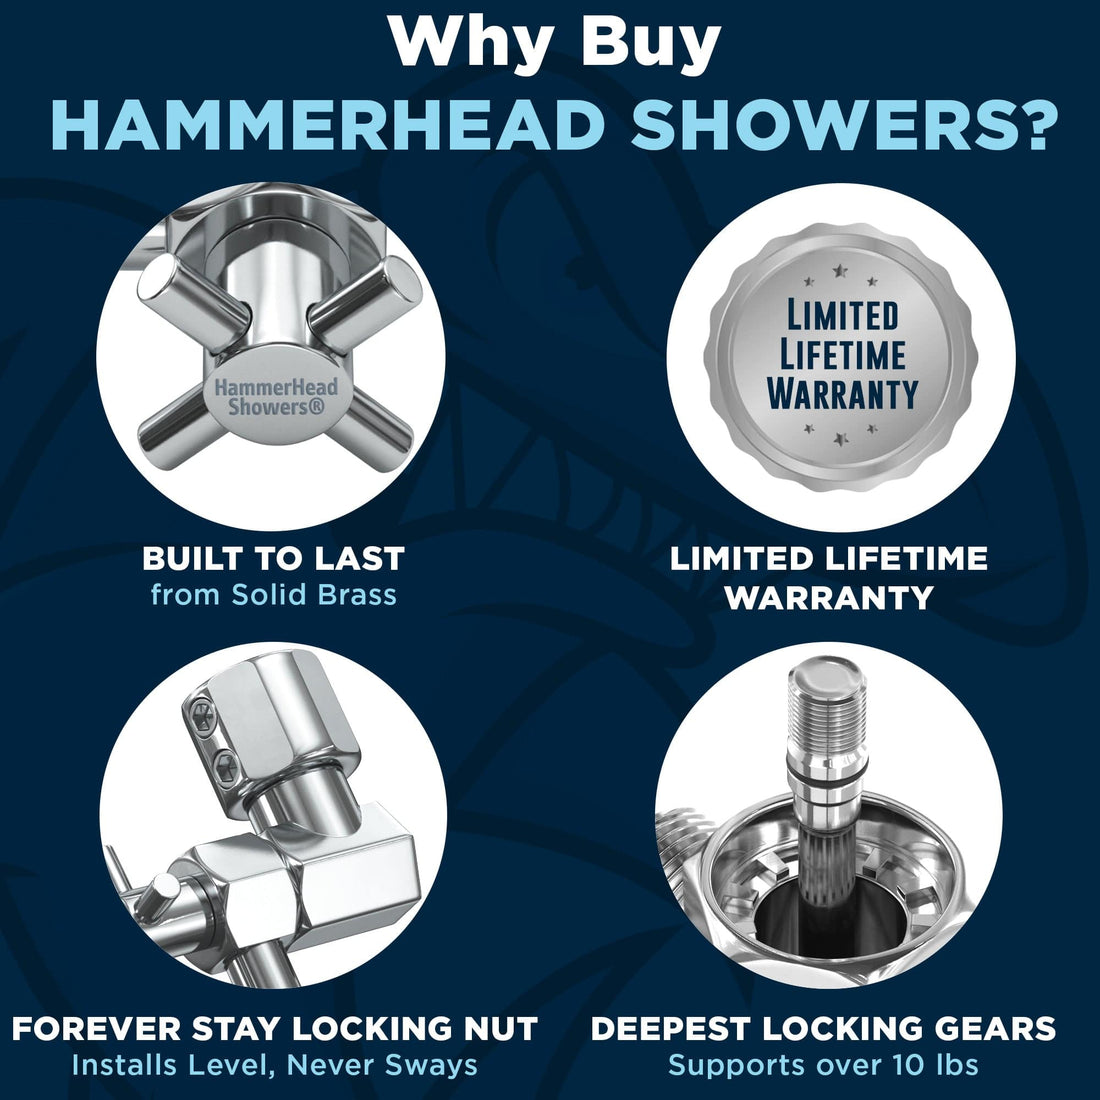 (Why Buy HammerHead Showers) 12 Inch Adjustable Shower Arm Extension Pipe Raise or Lower Shower Head Height Deepest Locking Gears On The Market  Chrome 12 Inch / Chrome - The Shower Head Store